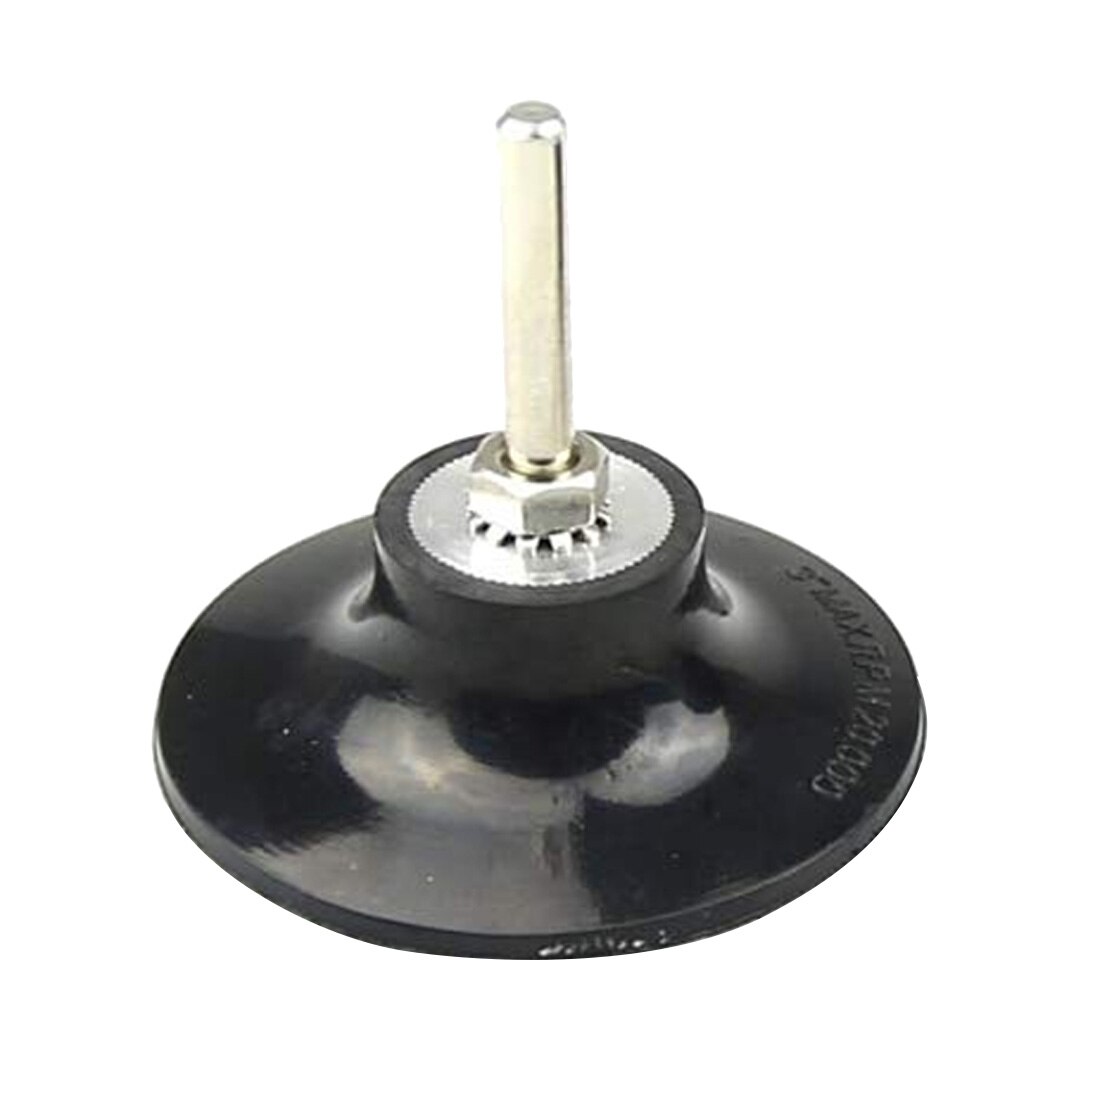 25/50/75mm Sanding Disc Pad Holder For Roloc Disc Pad 1/4" Shank Abrasive Tools Polish Quick Replacement: 3 inch 75mm